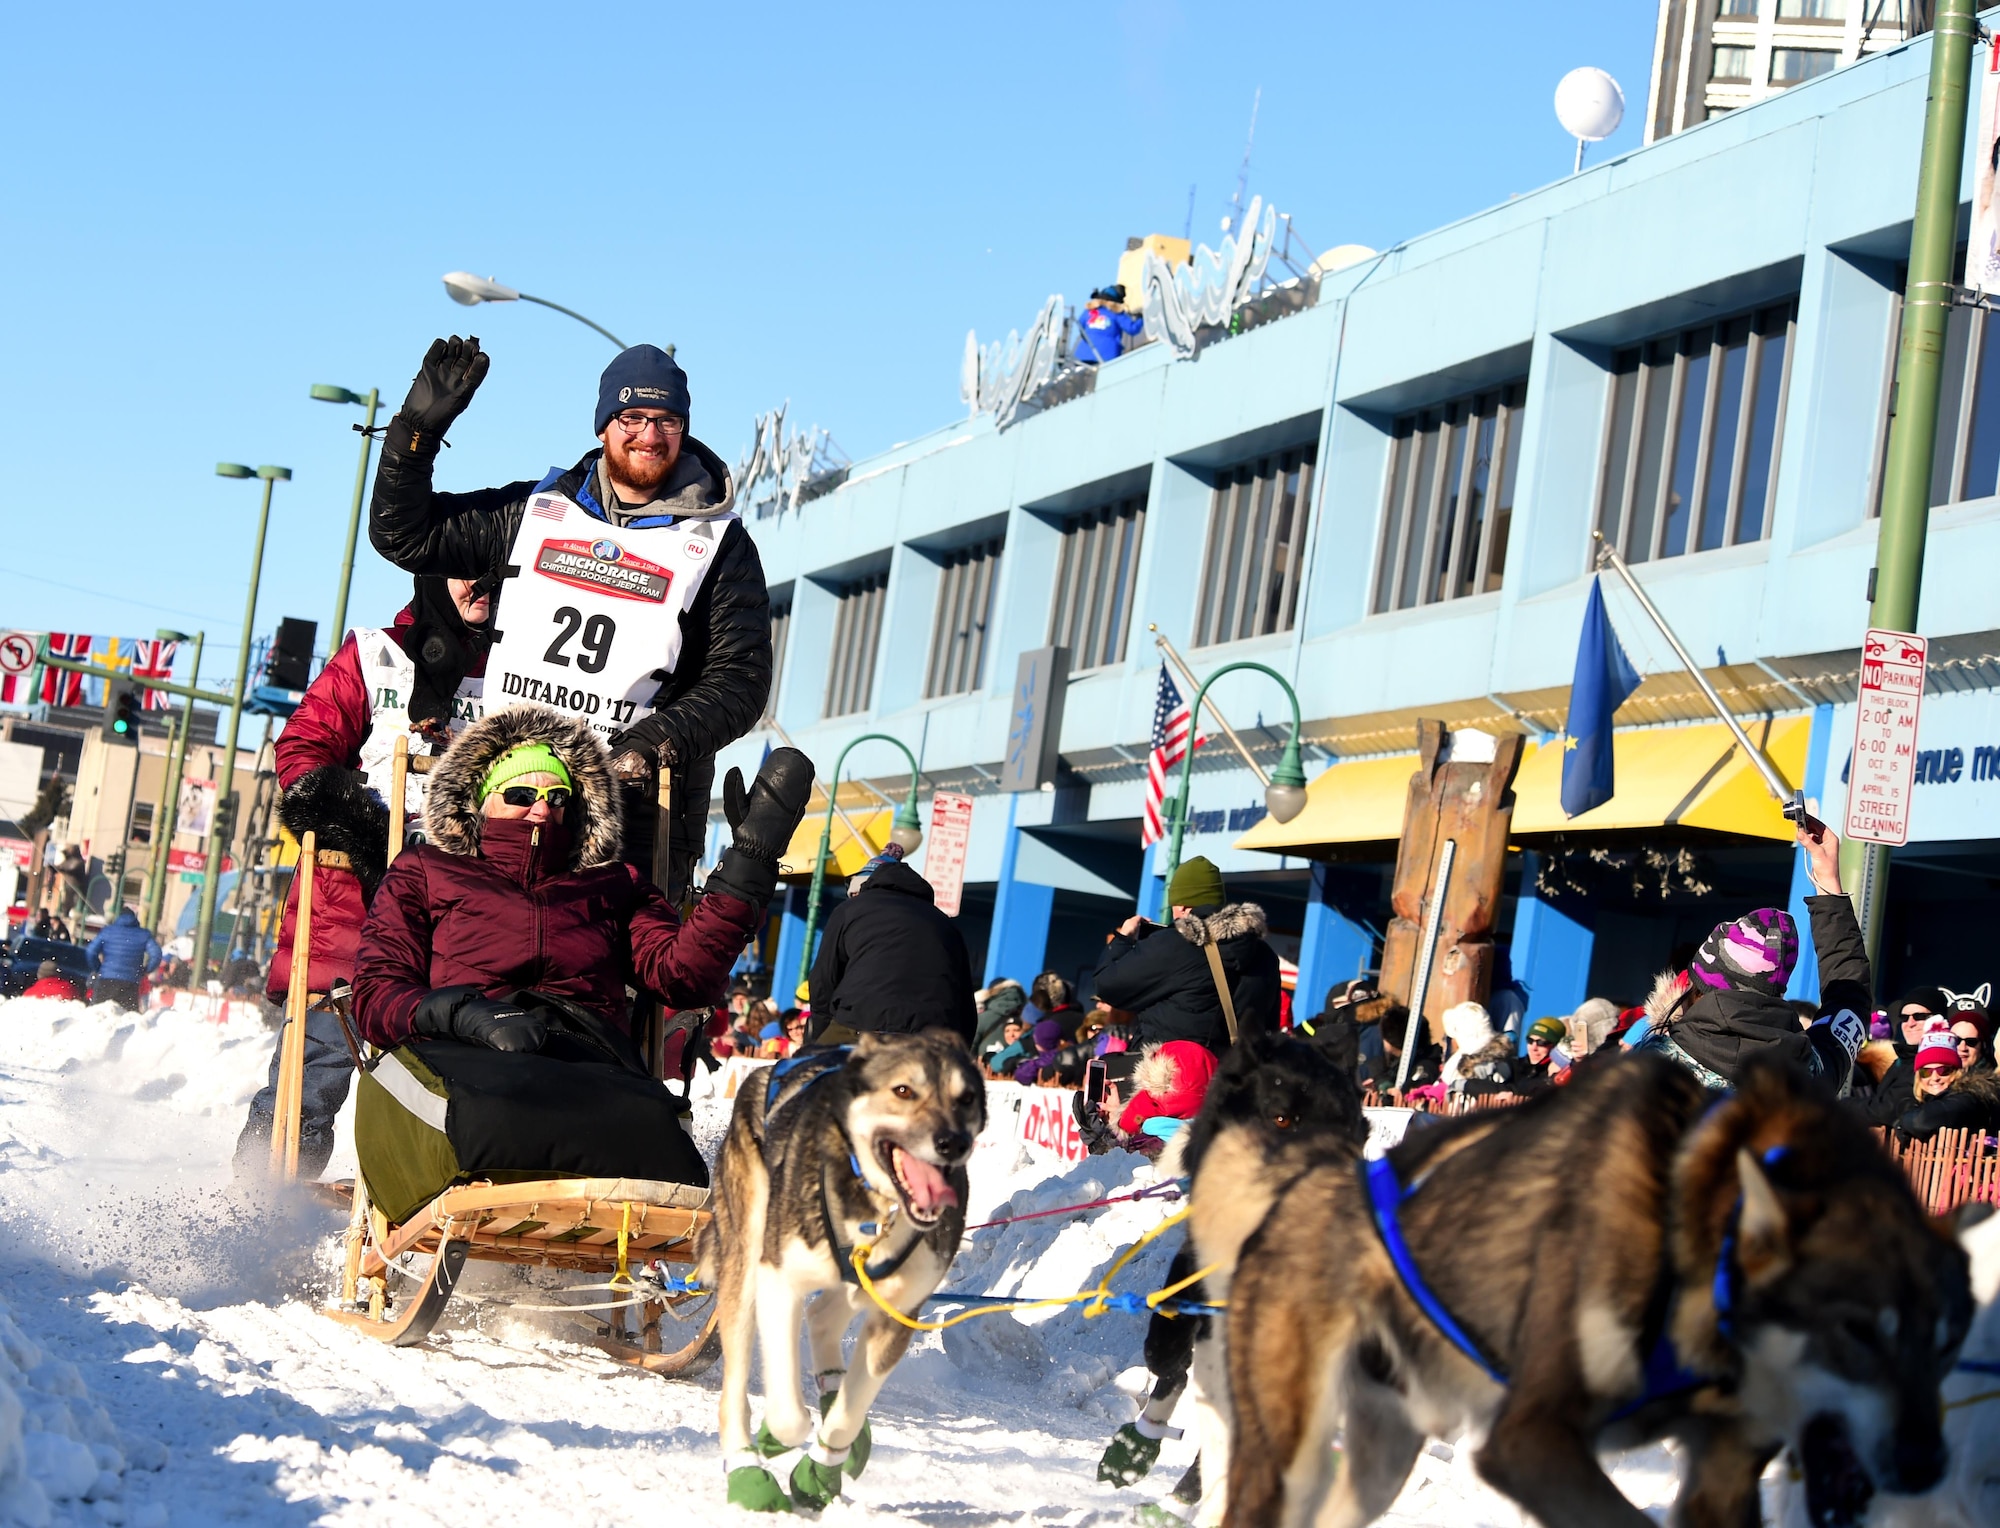 Wade Marrs, an Iditarod musher, waves at fans and spectators at the 45th annual Iditarod Trail Sled Dog Race in Anchorage, Alaska, March 4, 2017. More than 1,150 dogs pulled 72 mushers for the day’s 11 mile run to Campbell Airstrip.